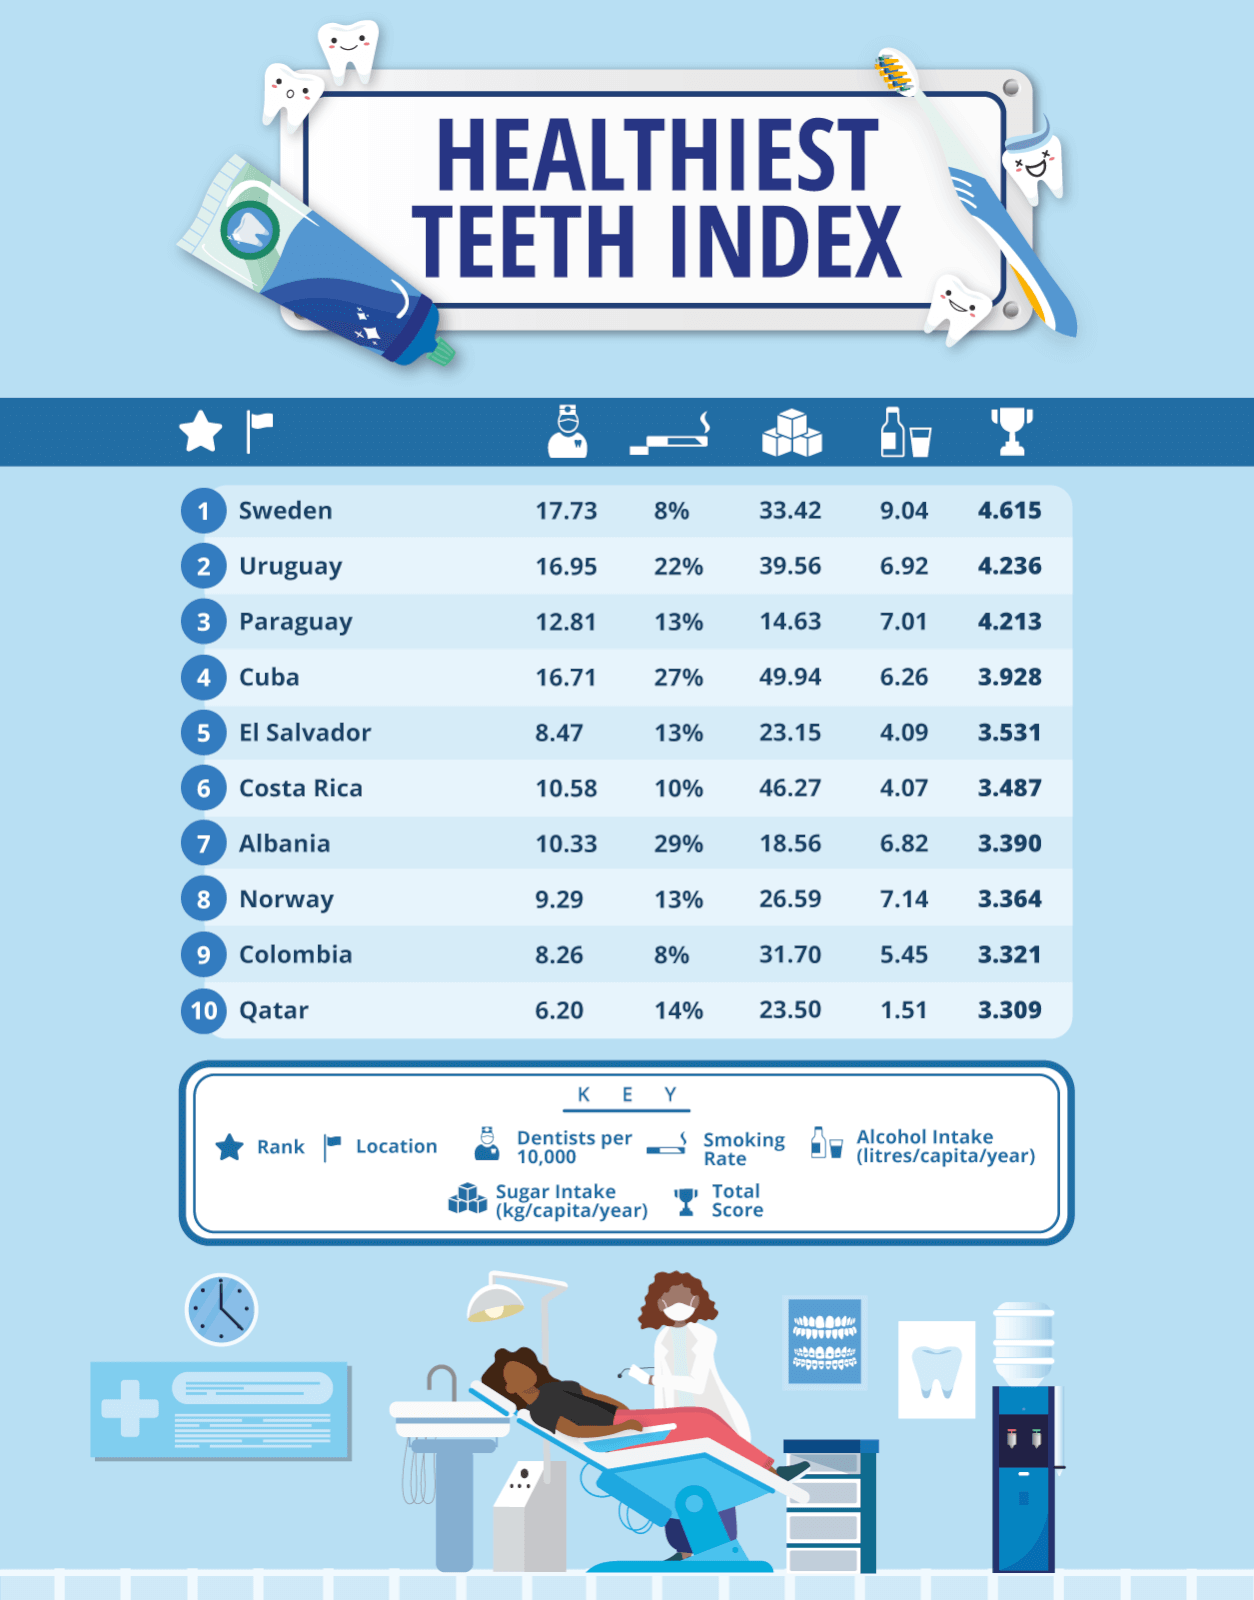 Image showing the top 10 countries with the healthiest teeth.